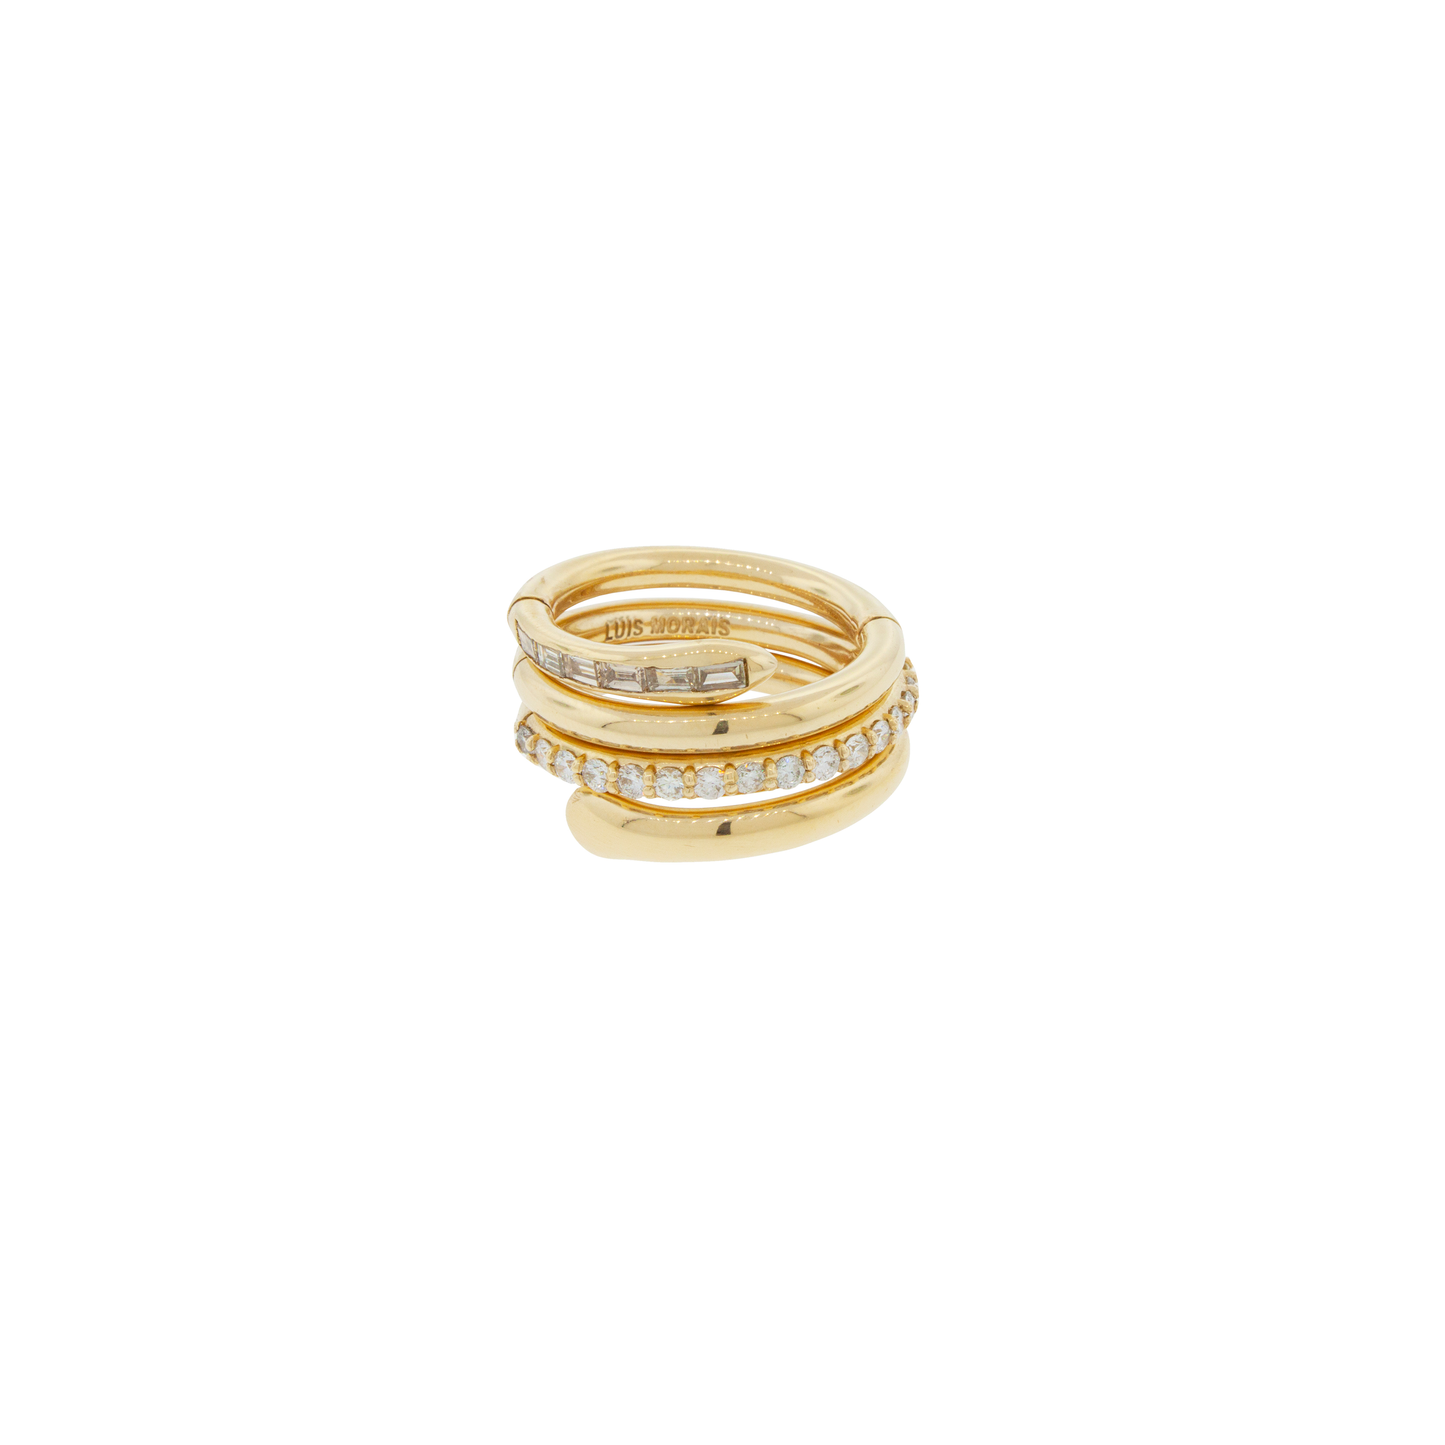 Luis Morais Gold Serpentine Ring with Baguette and Round Diamonds